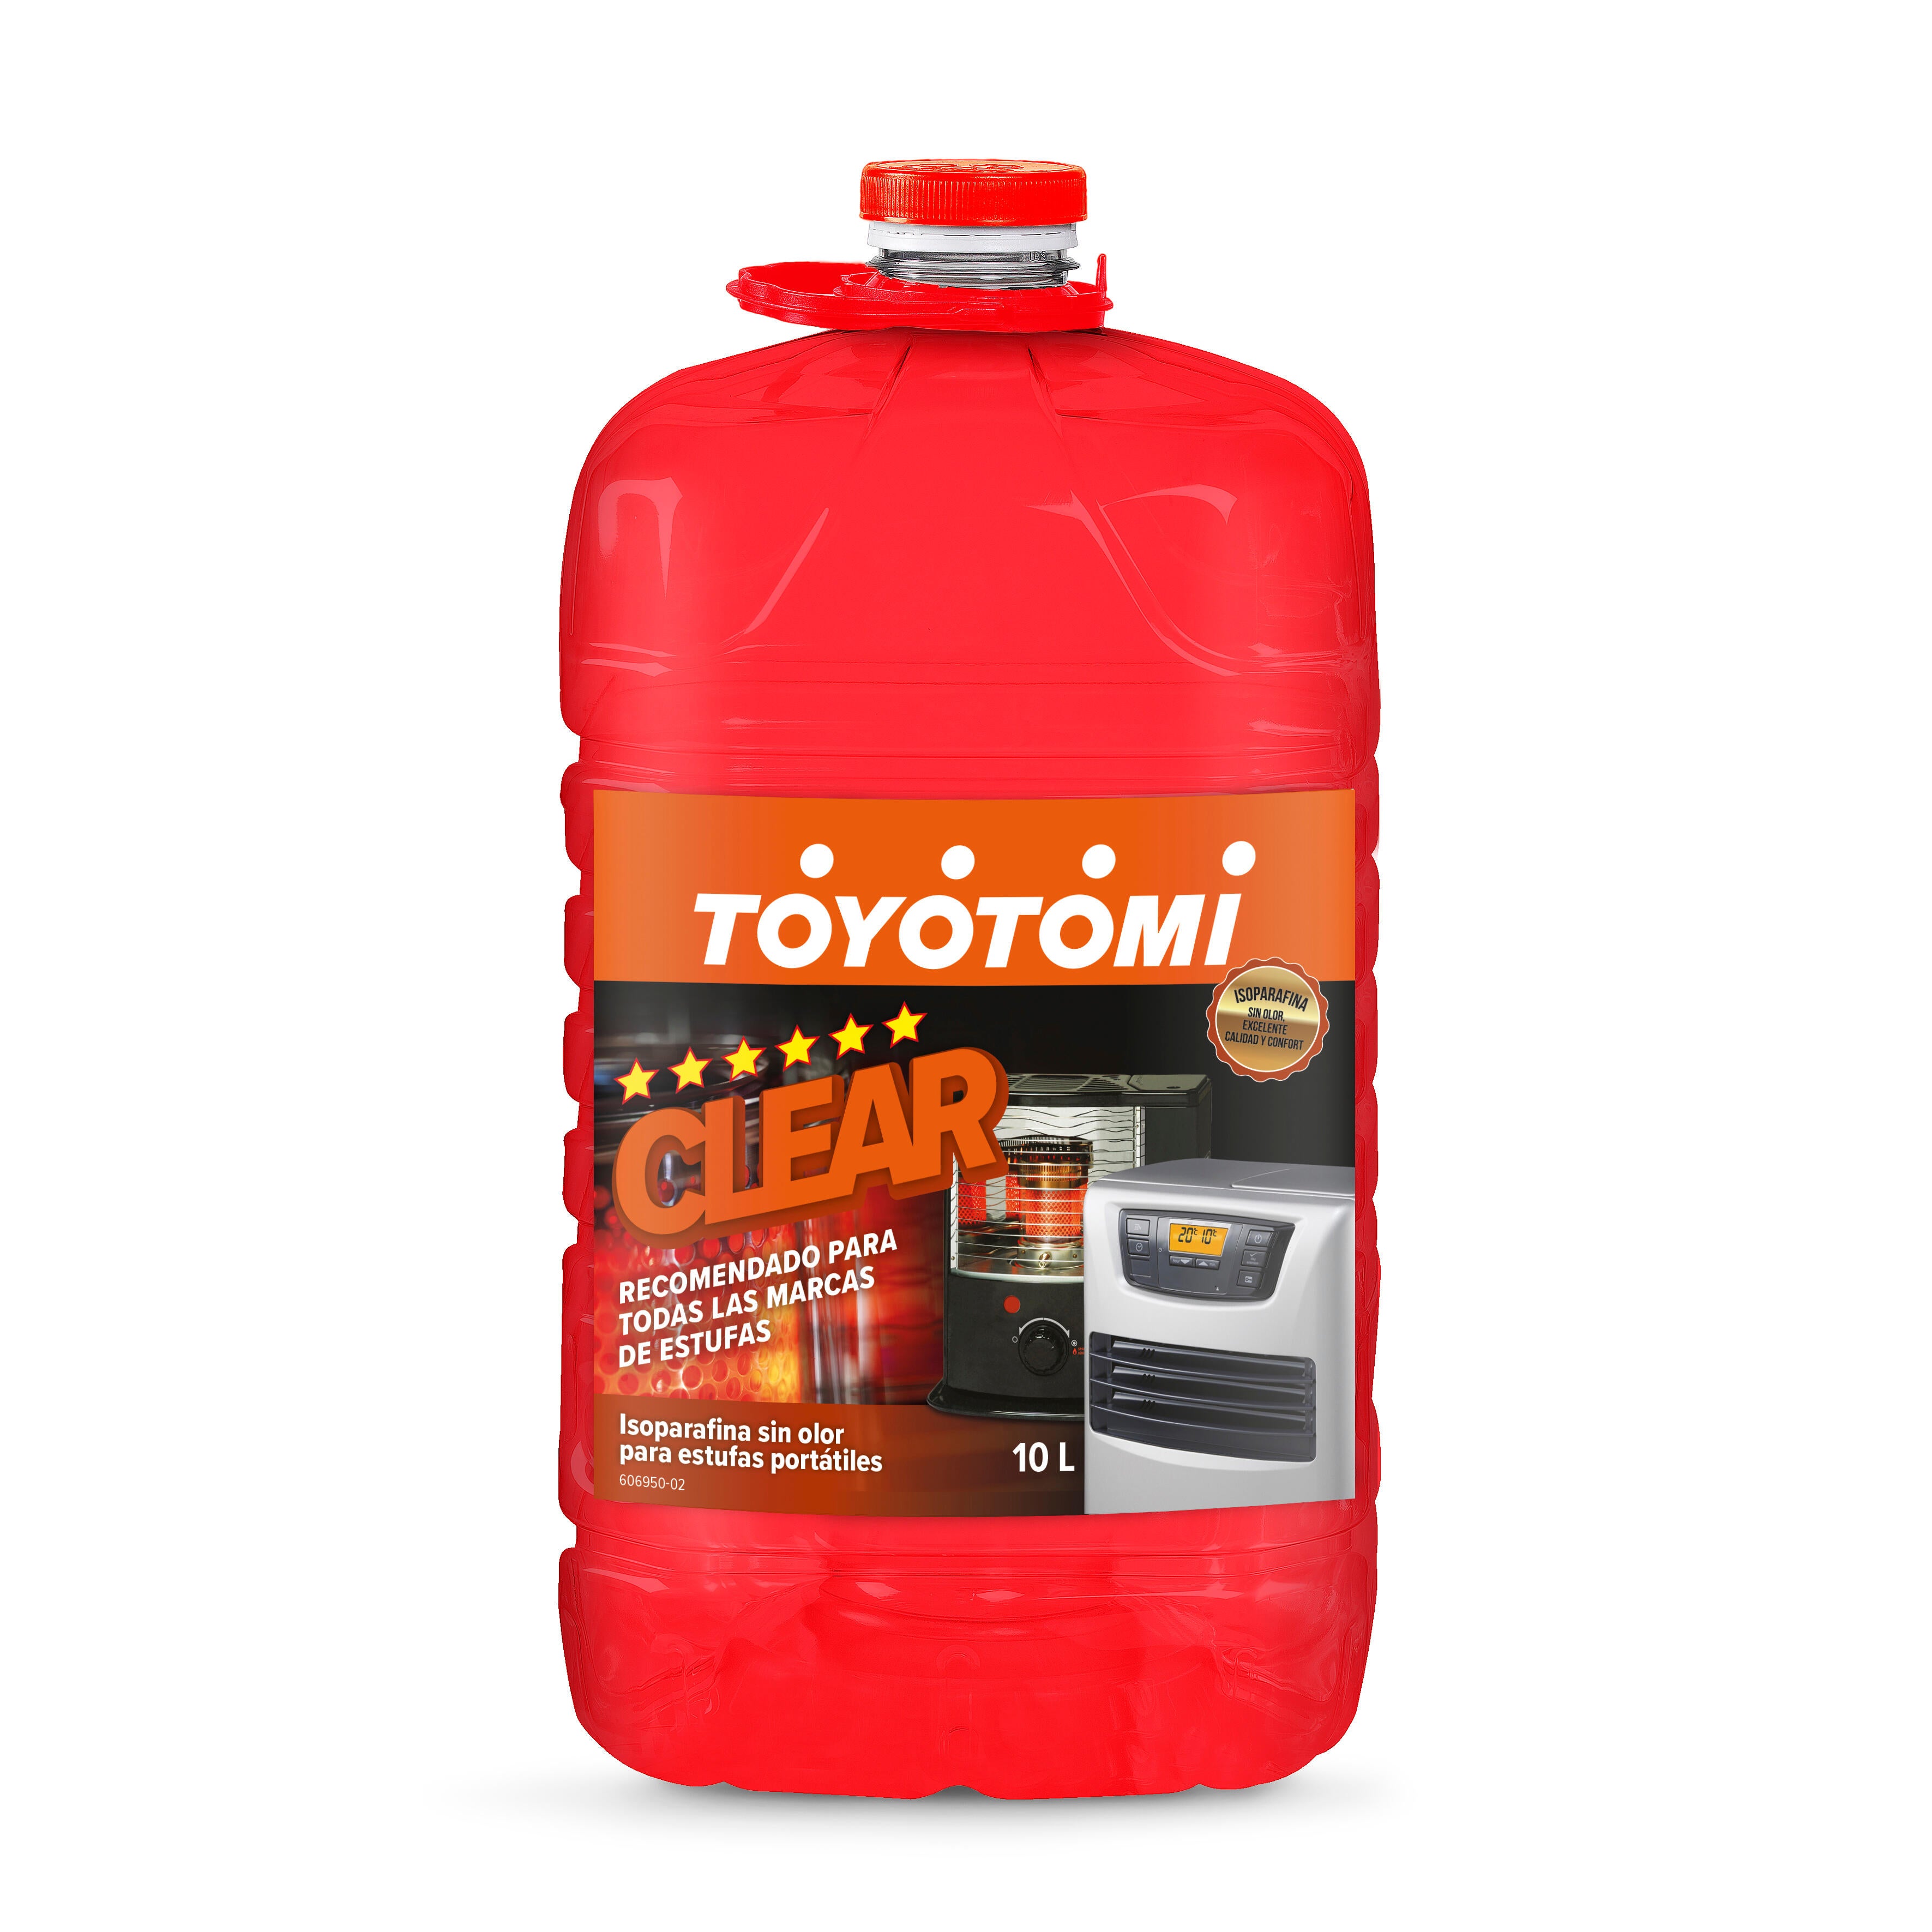 Toyotomi Parafina Clear (20 l)